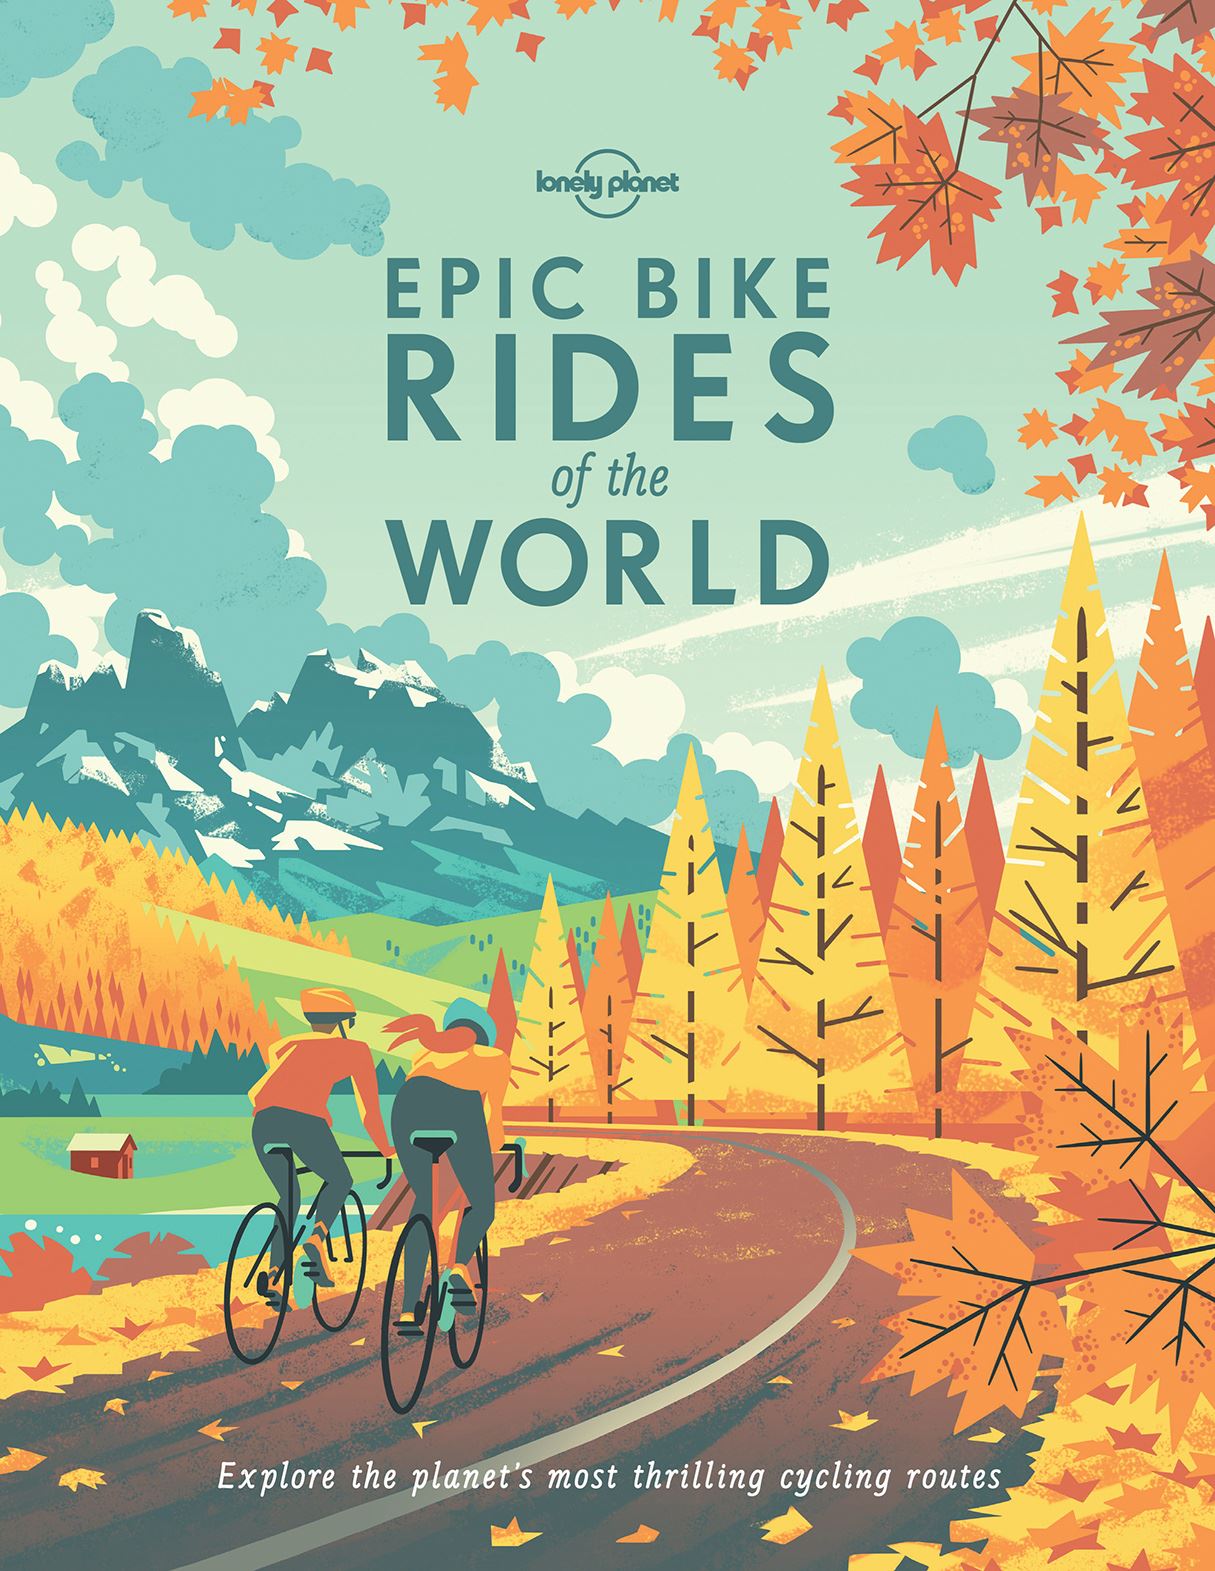 Epic Biles Rides of the World